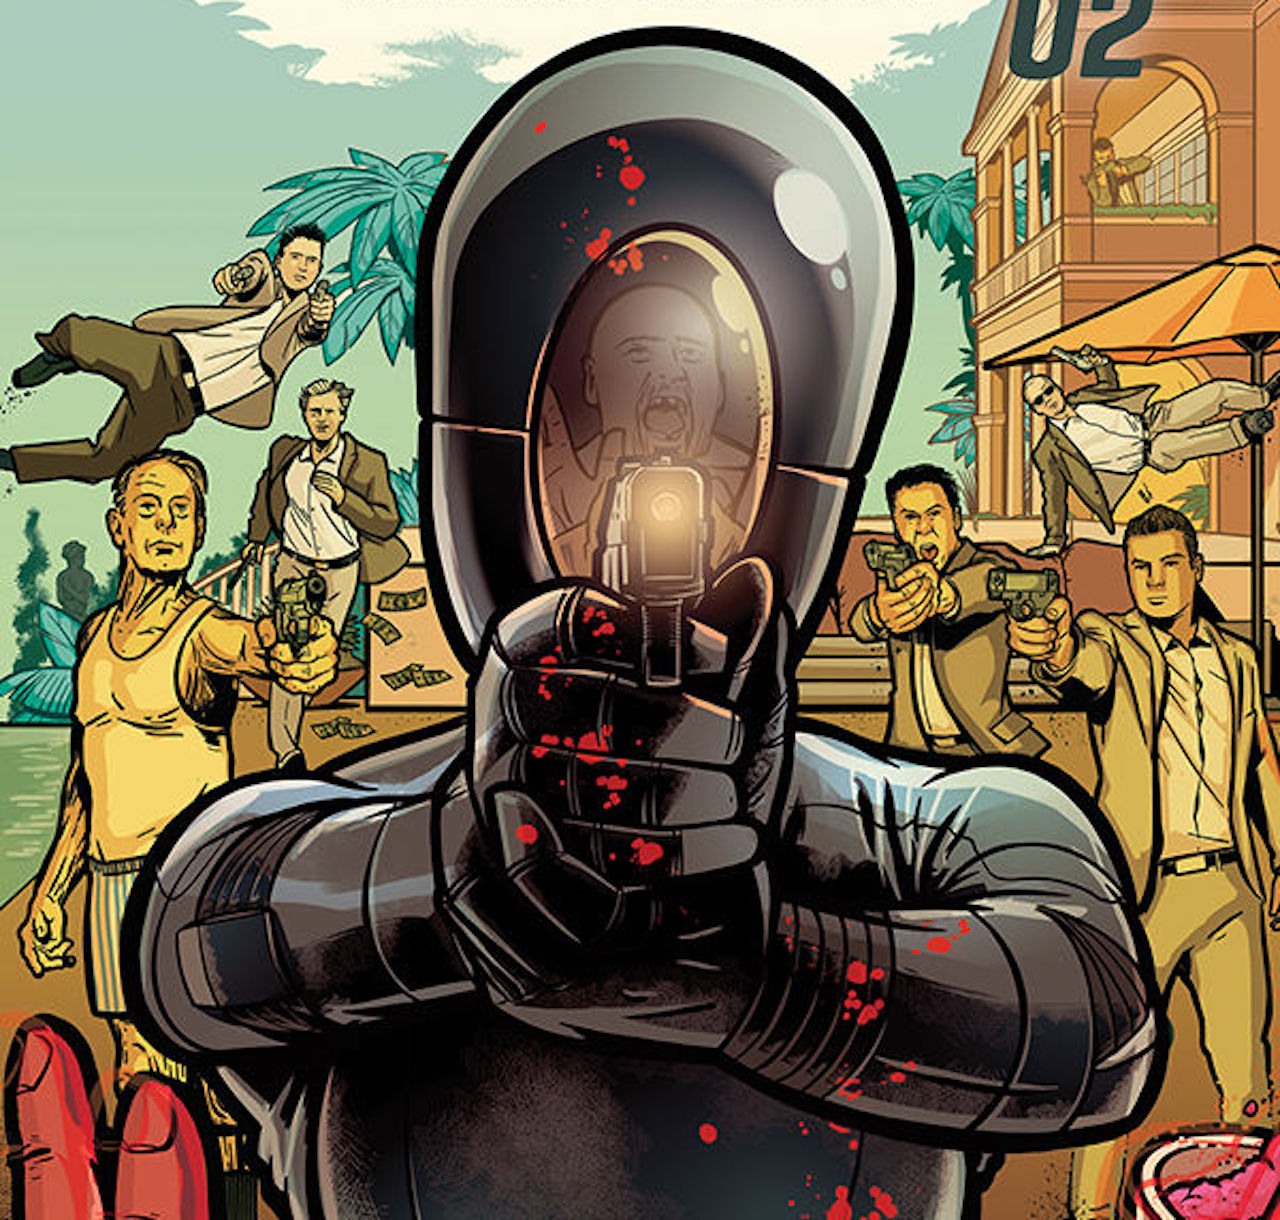 'Maskerade' #2 is a retro sci-fi filled with delicious dysfunction